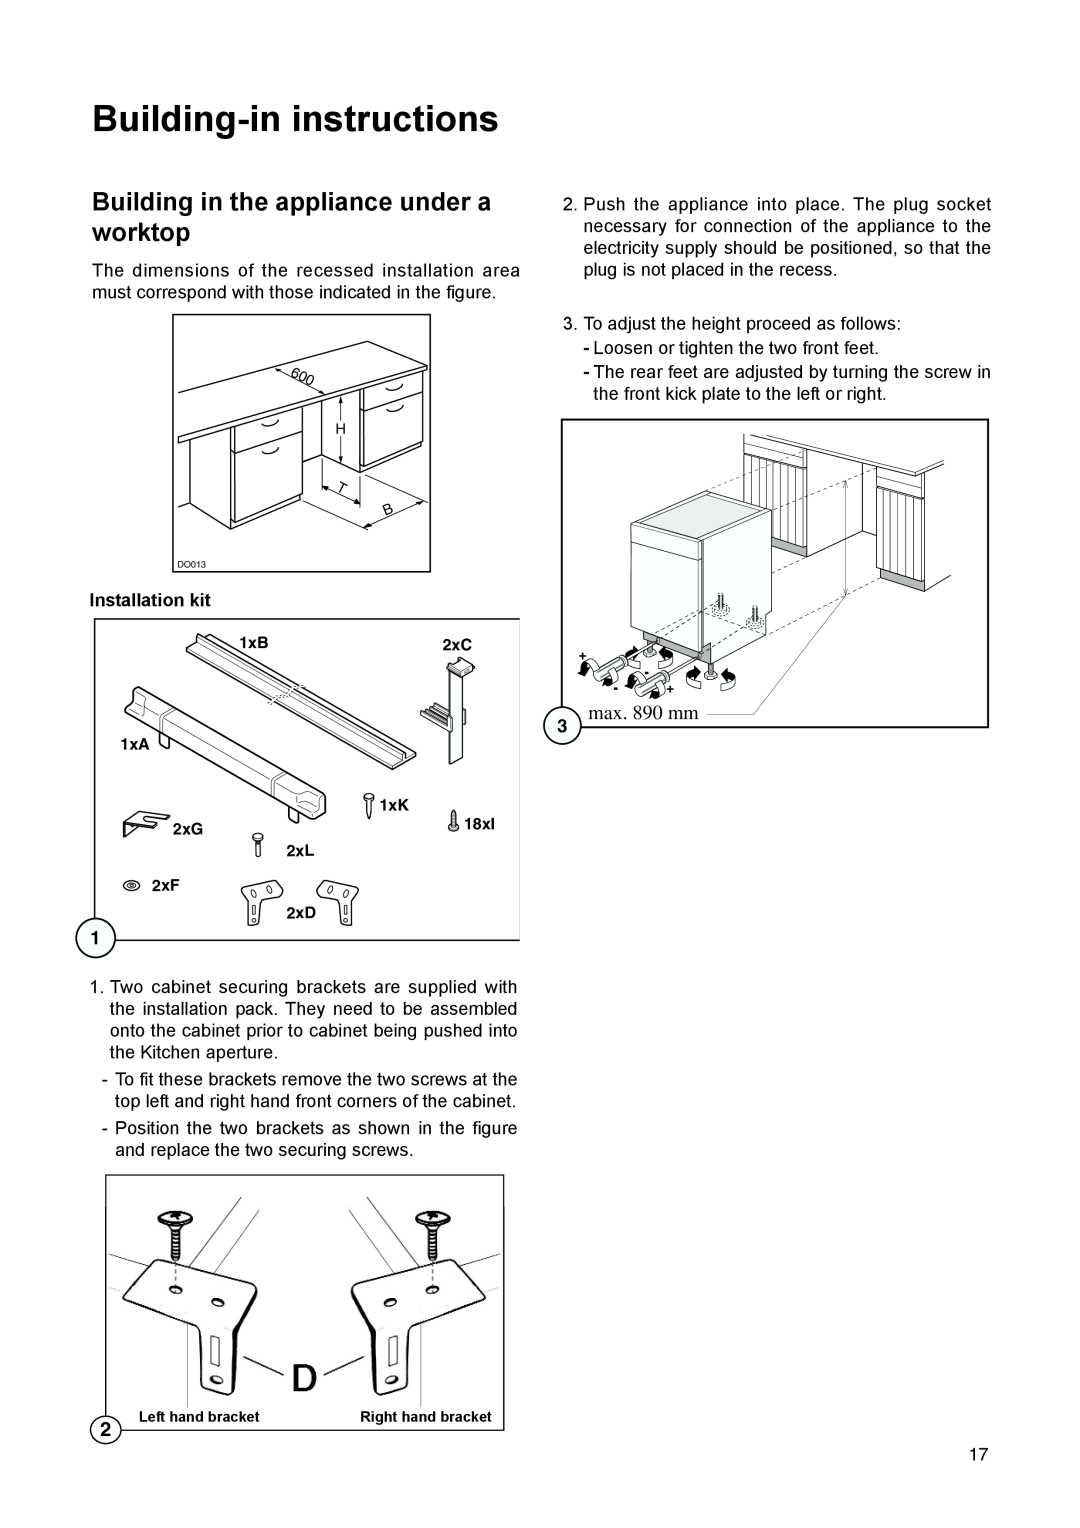 Electrolux ERU 13400 manual Building-in instructions, Building in the appliance under a worktop, max. 890 mm 